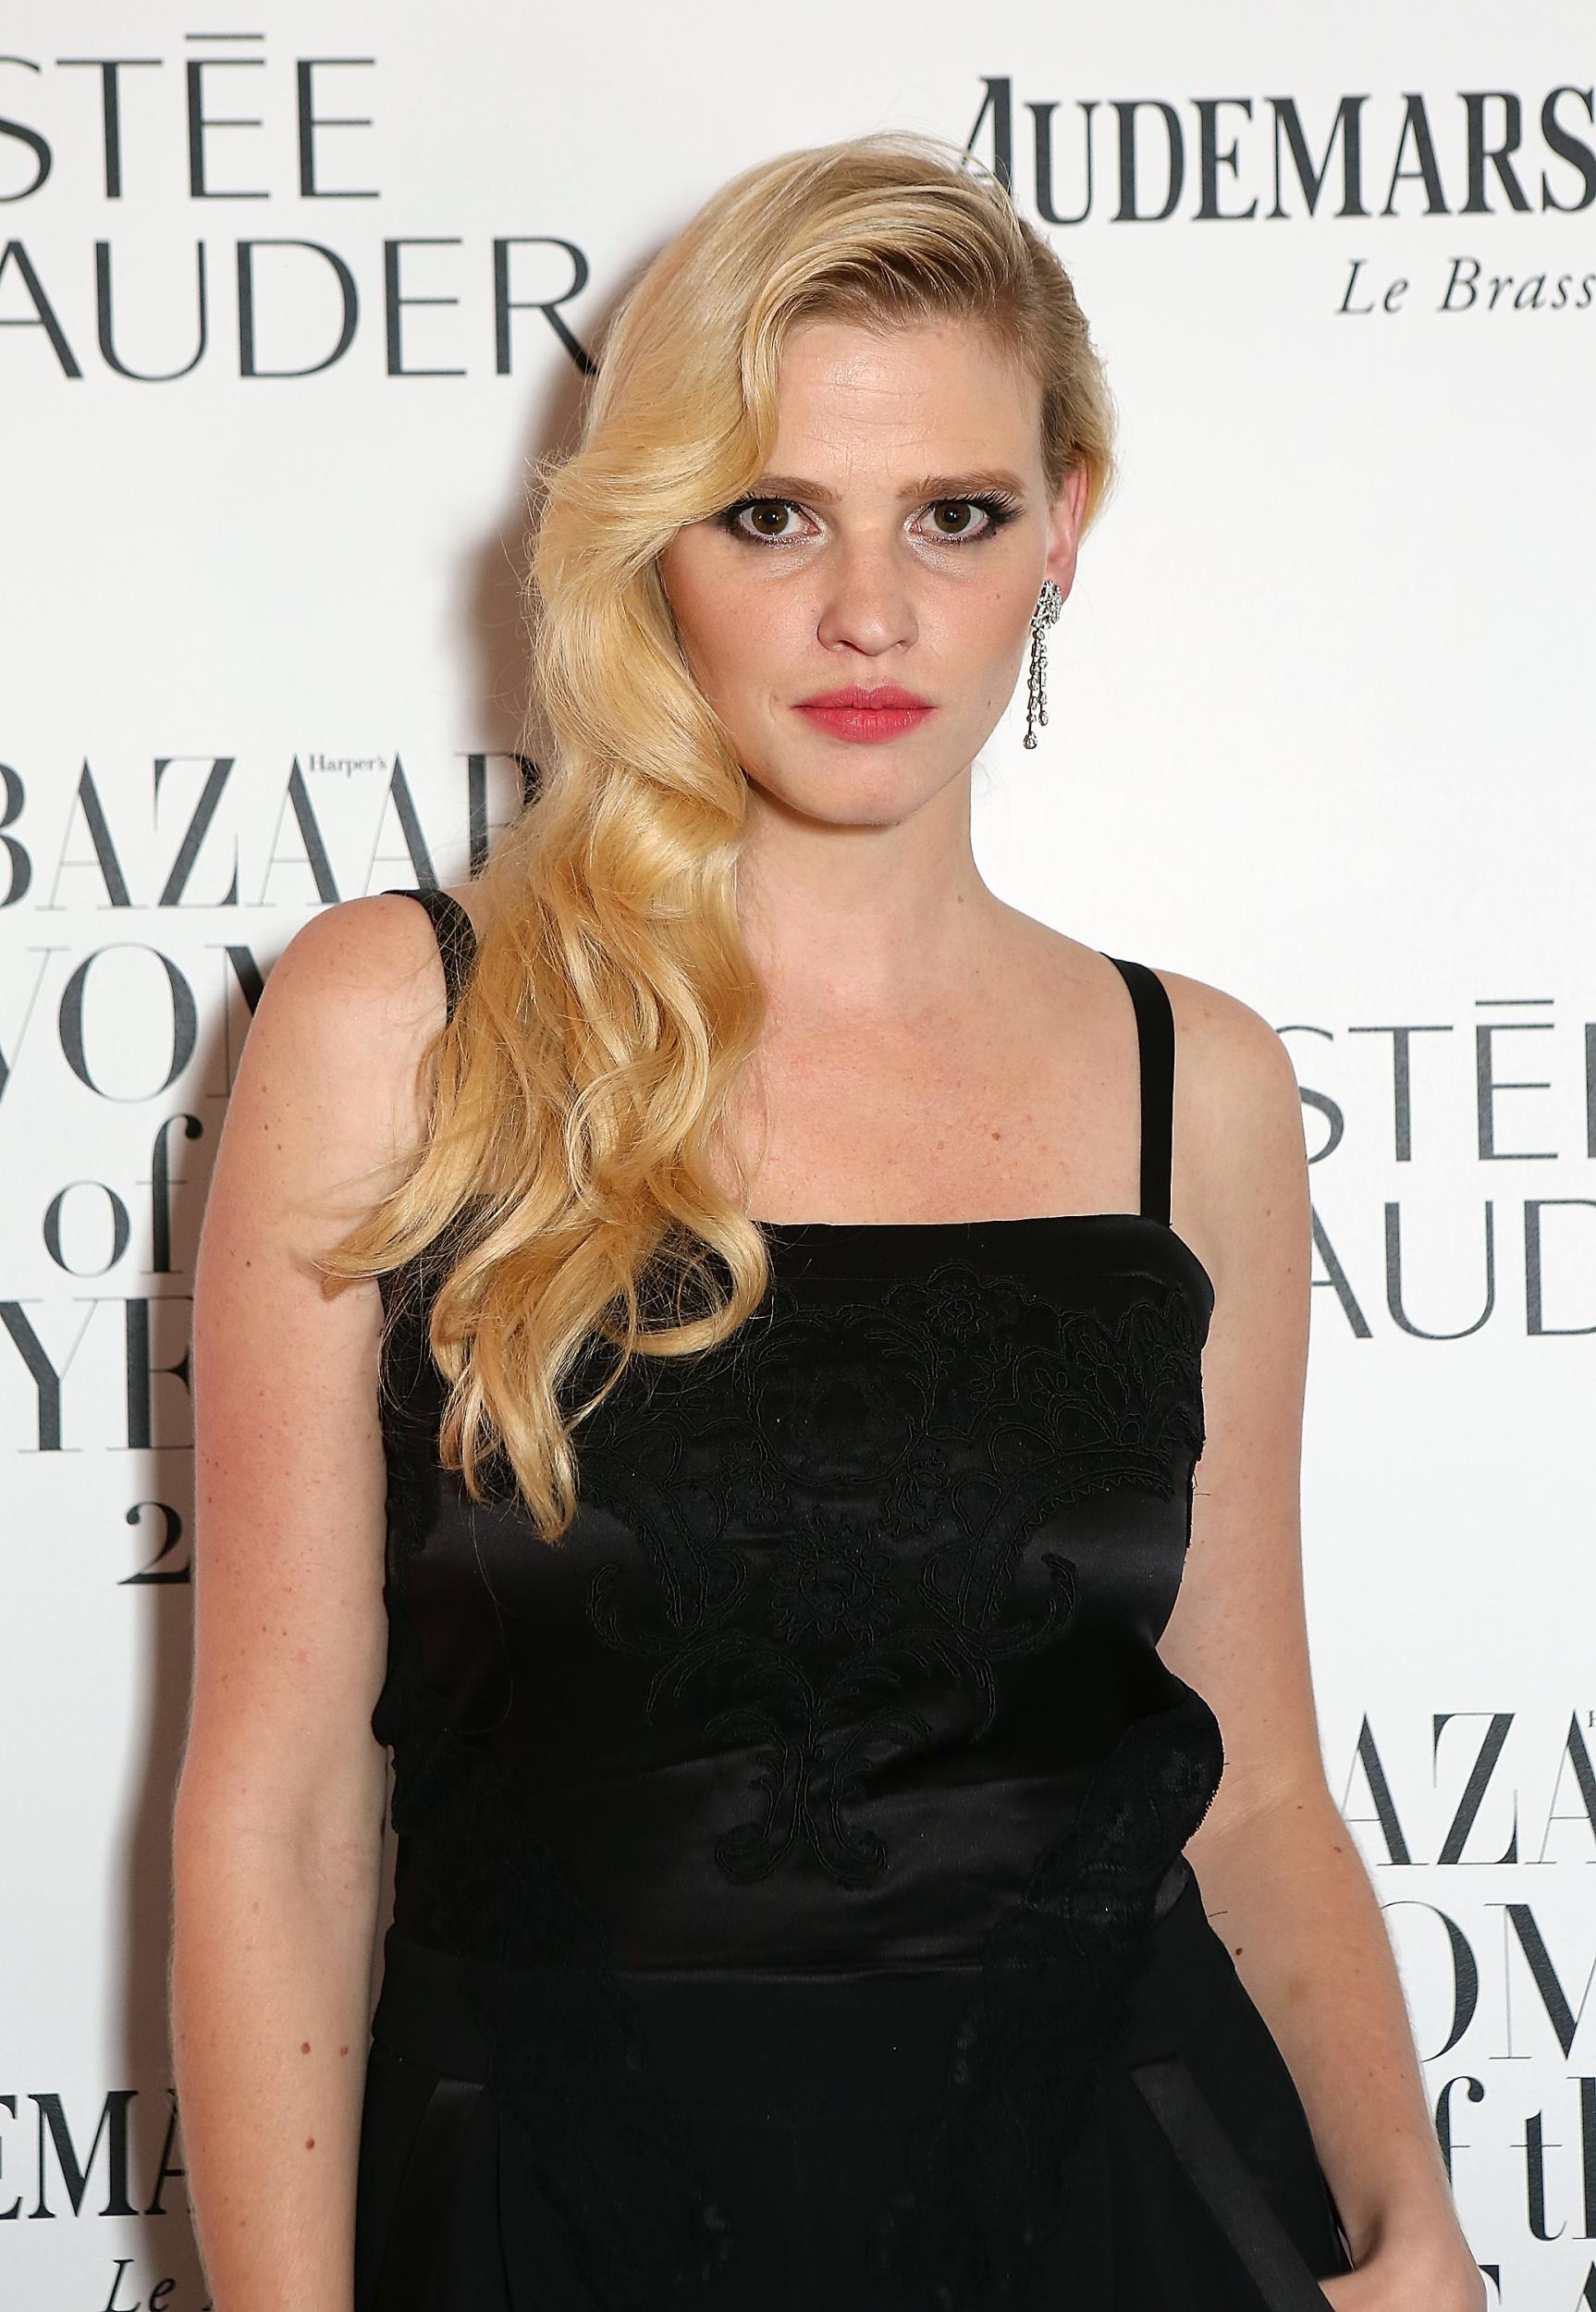 Lara Stone was presented with Model of the Year at the Harper's Bazaar Women of the Year Awards 2015 in London